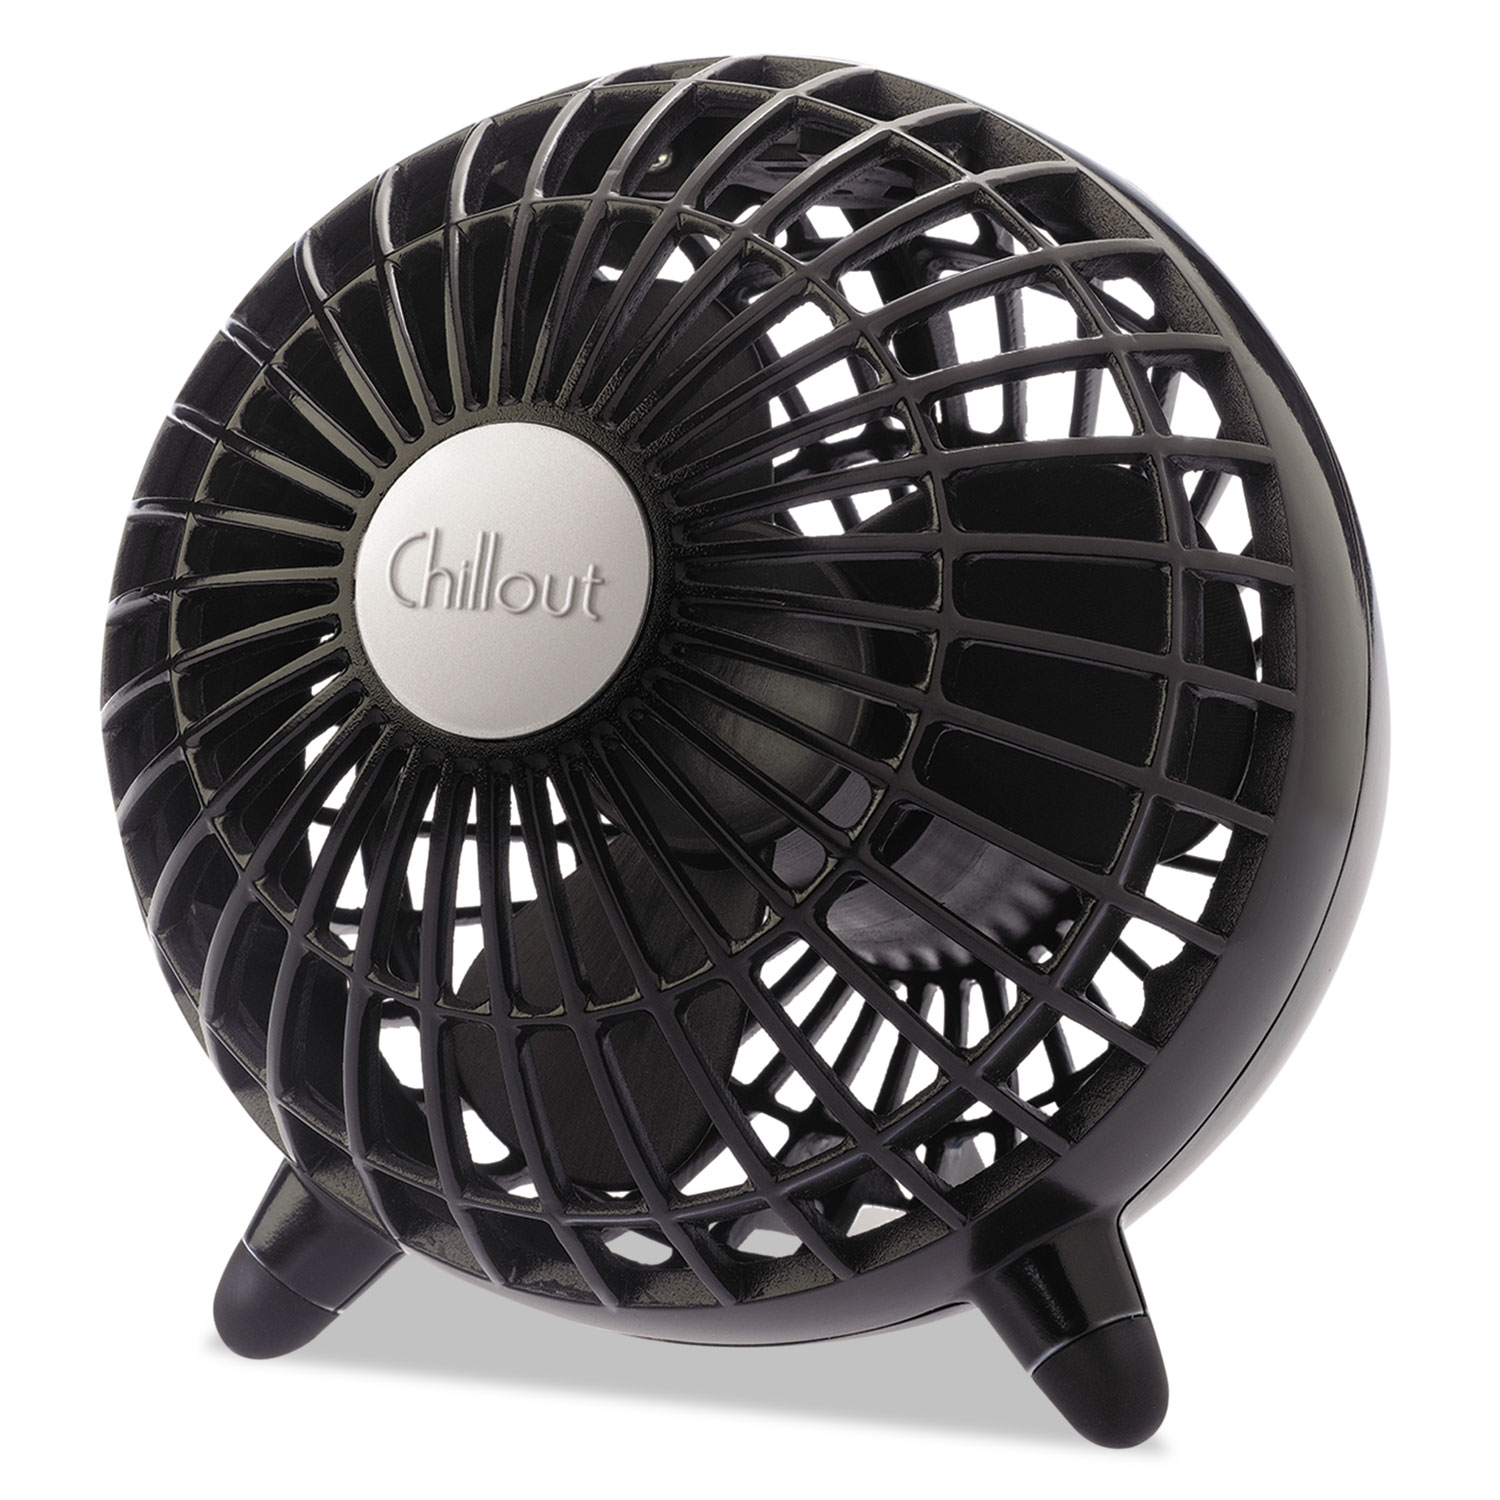 Chillout USB/AC Adapter Personal Fan, Black, 6"Diameter, 1 Speed